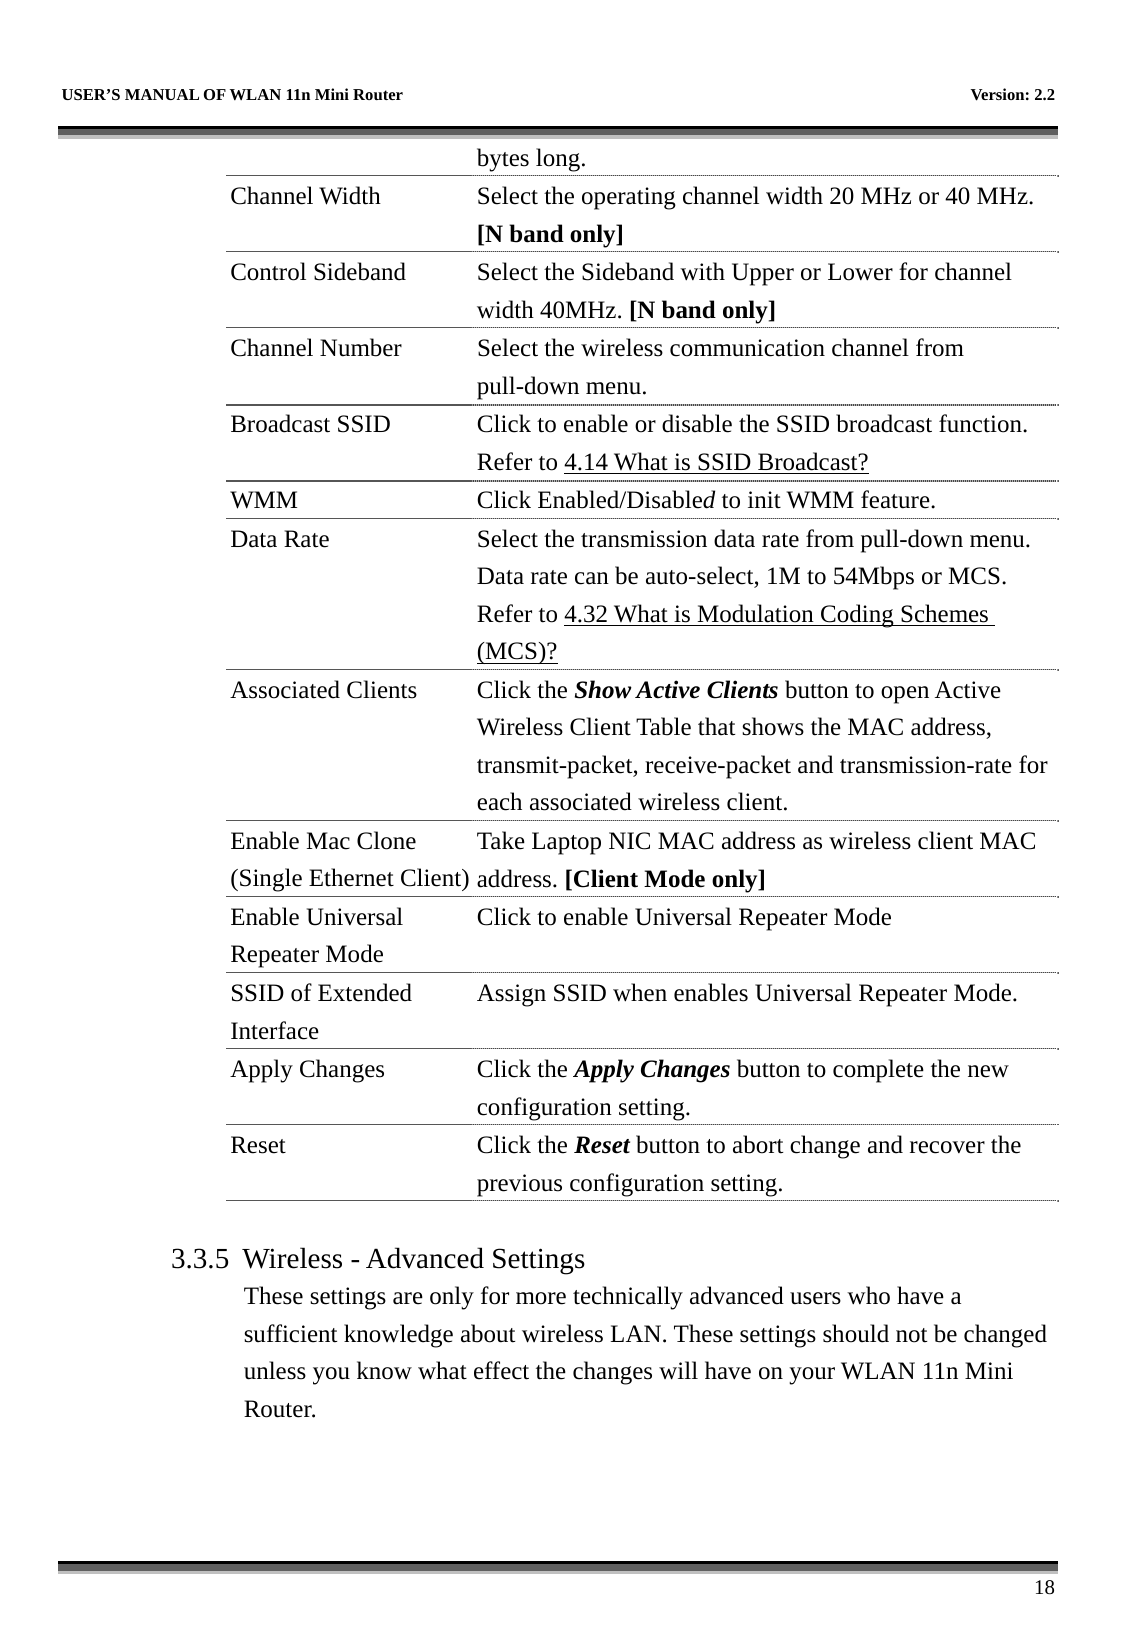   USER’S MANUAL OF WLAN 11n Mini Router    Version: 2.2      18 bytes long. Channel Width  Select the operating channel width 20 MHz or 40 MHz. [N band only] Control Sideband  Select the Sideband with Upper or Lower for channel width 40MHz. [N band only] Channel Number  Select the wireless communication channel from pull-down menu. Broadcast SSID  Click to enable or disable the SSID broadcast function. Refer to 4.14 What is SSID Broadcast? WMM Click Enabled/Disabled to init WMM feature. Data Rate  Select the transmission data rate from pull-down menu. Data rate can be auto-select, 1M to 54Mbps or MCS. Refer to 4.32 What is Modulation Coding Schemes (MCS)? Associated Clients  Click the Show Active Clients button to open Active Wireless Client Table that shows the MAC address, transmit-packet, receive-packet and transmission-rate for each associated wireless client. Enable Mac Clone (Single Ethernet Client)Take Laptop NIC MAC address as wireless client MAC address. [Client Mode only] Enable Universal Repeater Mode Click to enable Universal Repeater Mode SSID of Extended Interface Assign SSID when enables Universal Repeater Mode. Apply Changes  Click the Apply Changes button to complete the new configuration setting. Reset Click the Reset button to abort change and recover the previous configuration setting.  3.3.5  Wireless - Advanced Settings These settings are only for more technically advanced users who have a sufficient knowledge about wireless LAN. These settings should not be changed unless you know what effect the changes will have on your WLAN 11n Mini Router.  